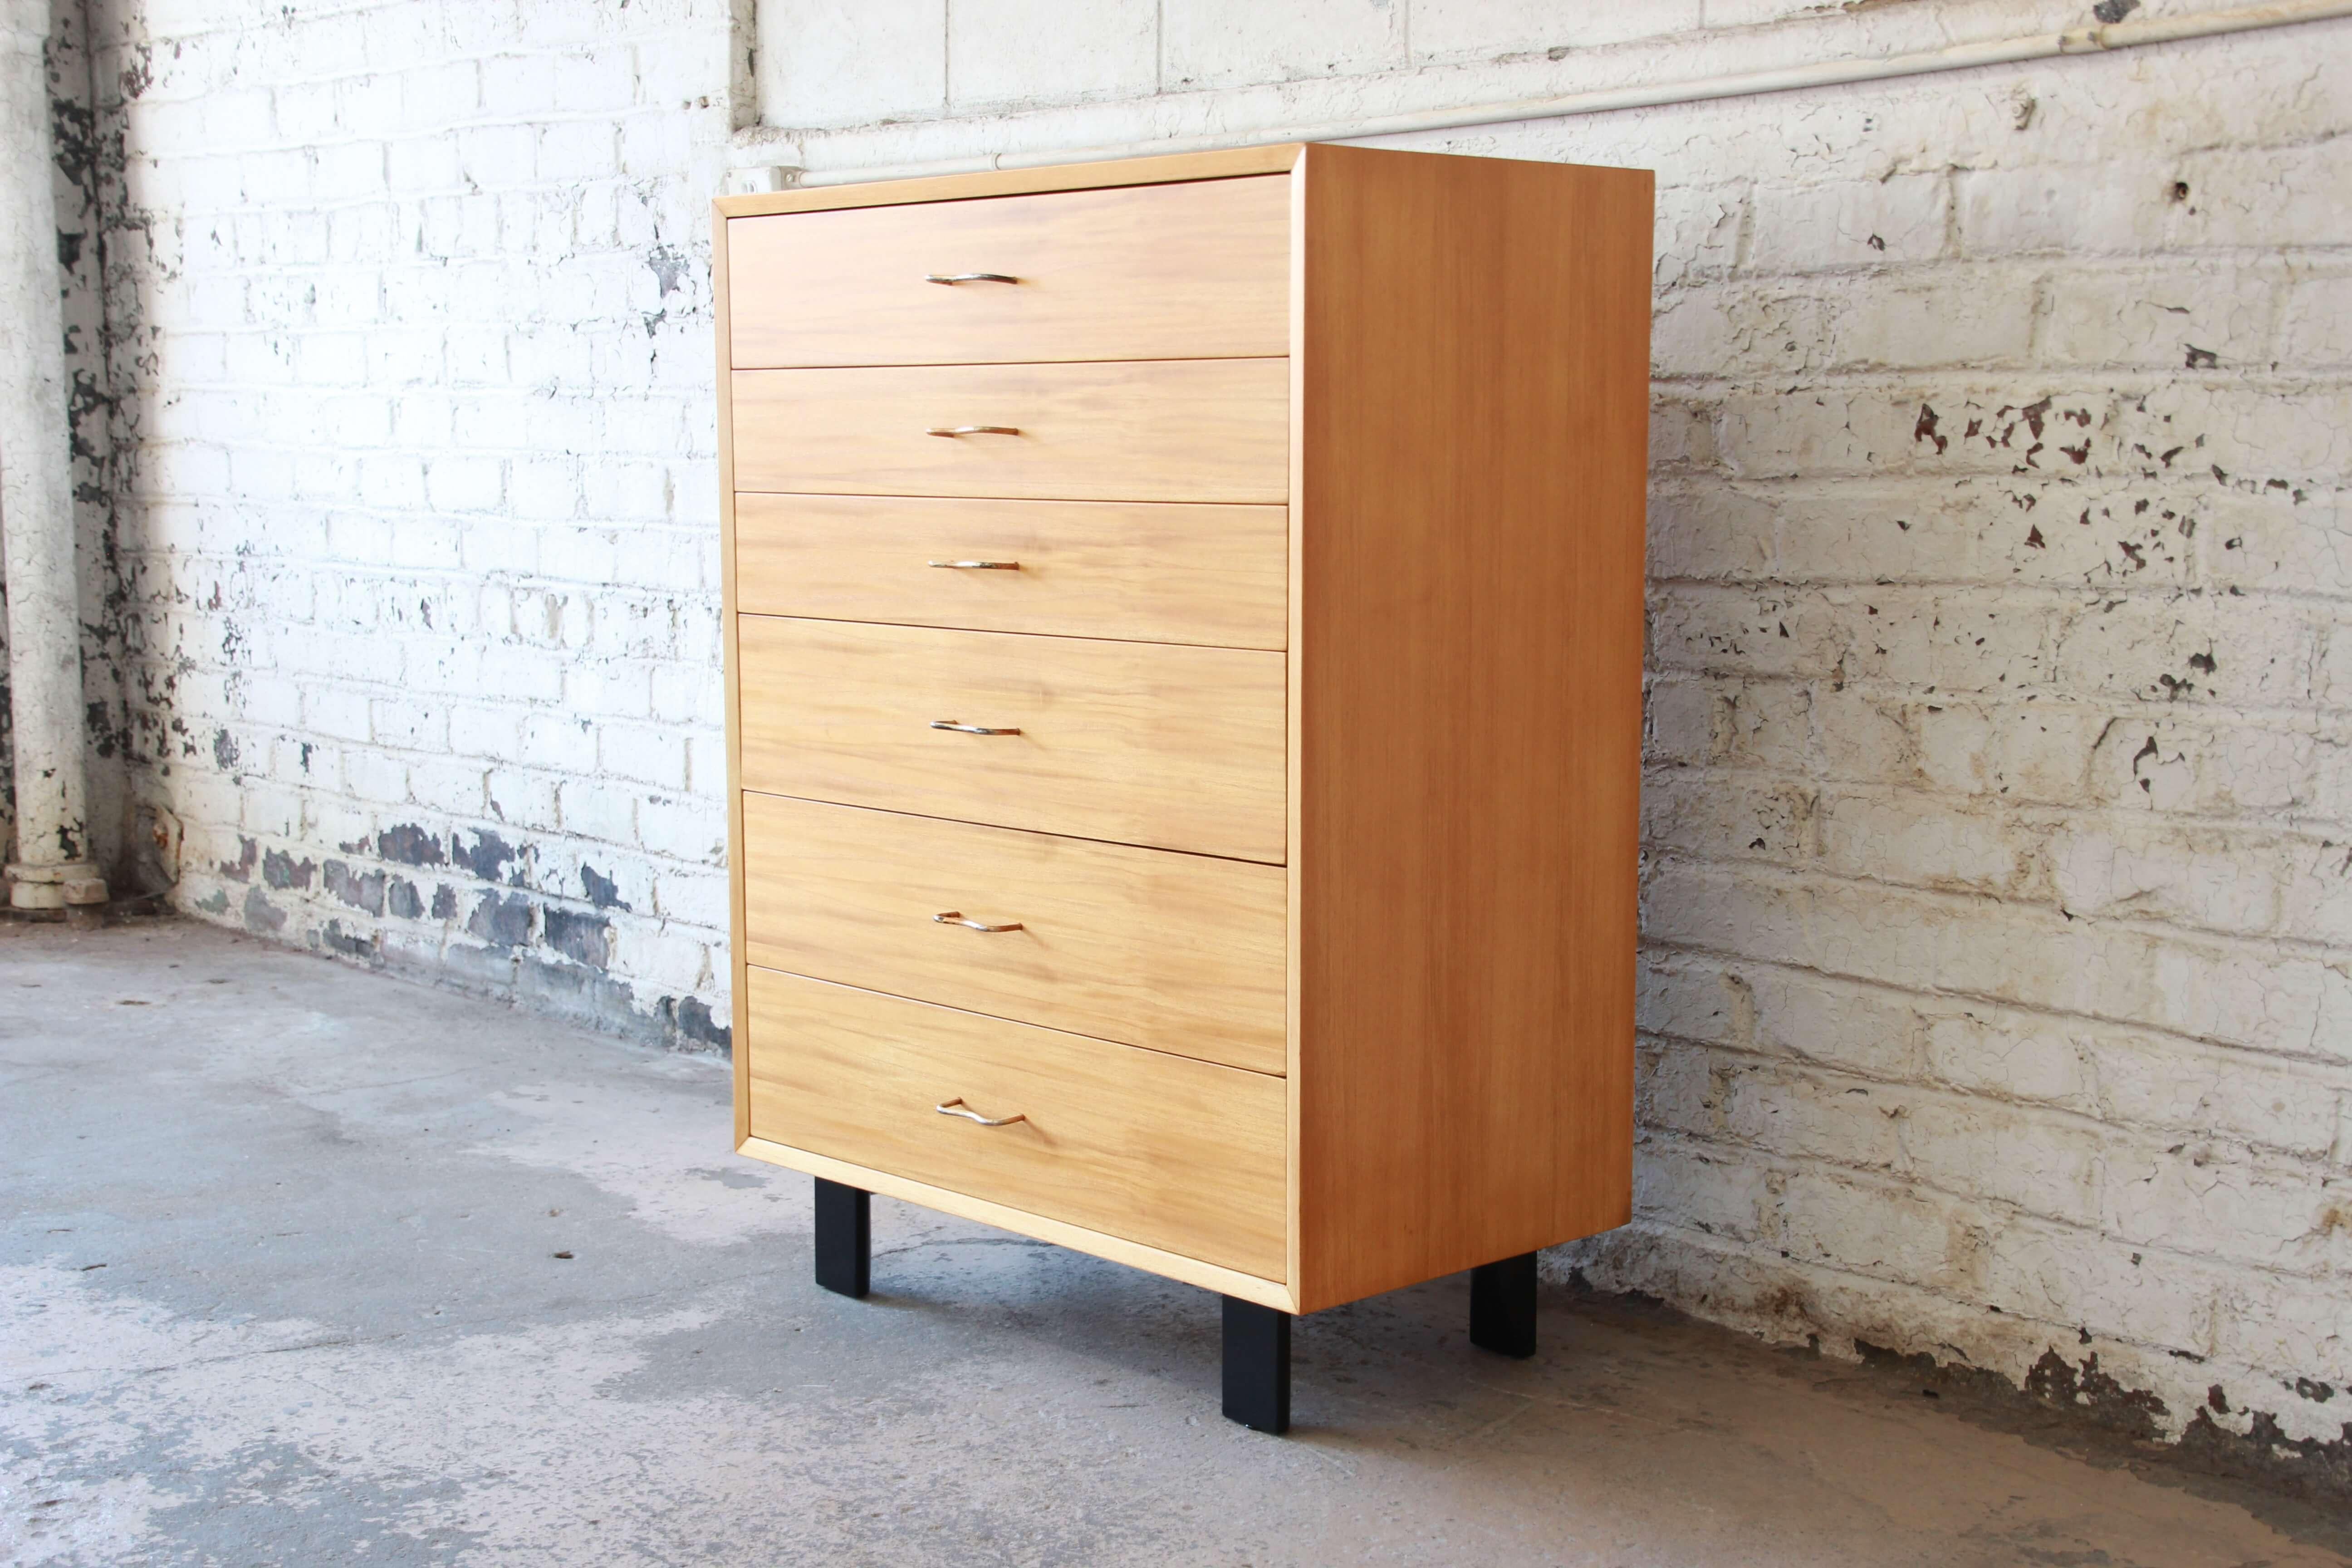 Offering a very nice newly restored George Nelson highboy dresser for Herman Miller. The dresser has six smooth sliding drawer offering varying sizes. The base of the chest has nice signature black legs often seen in Nelson's work. The original